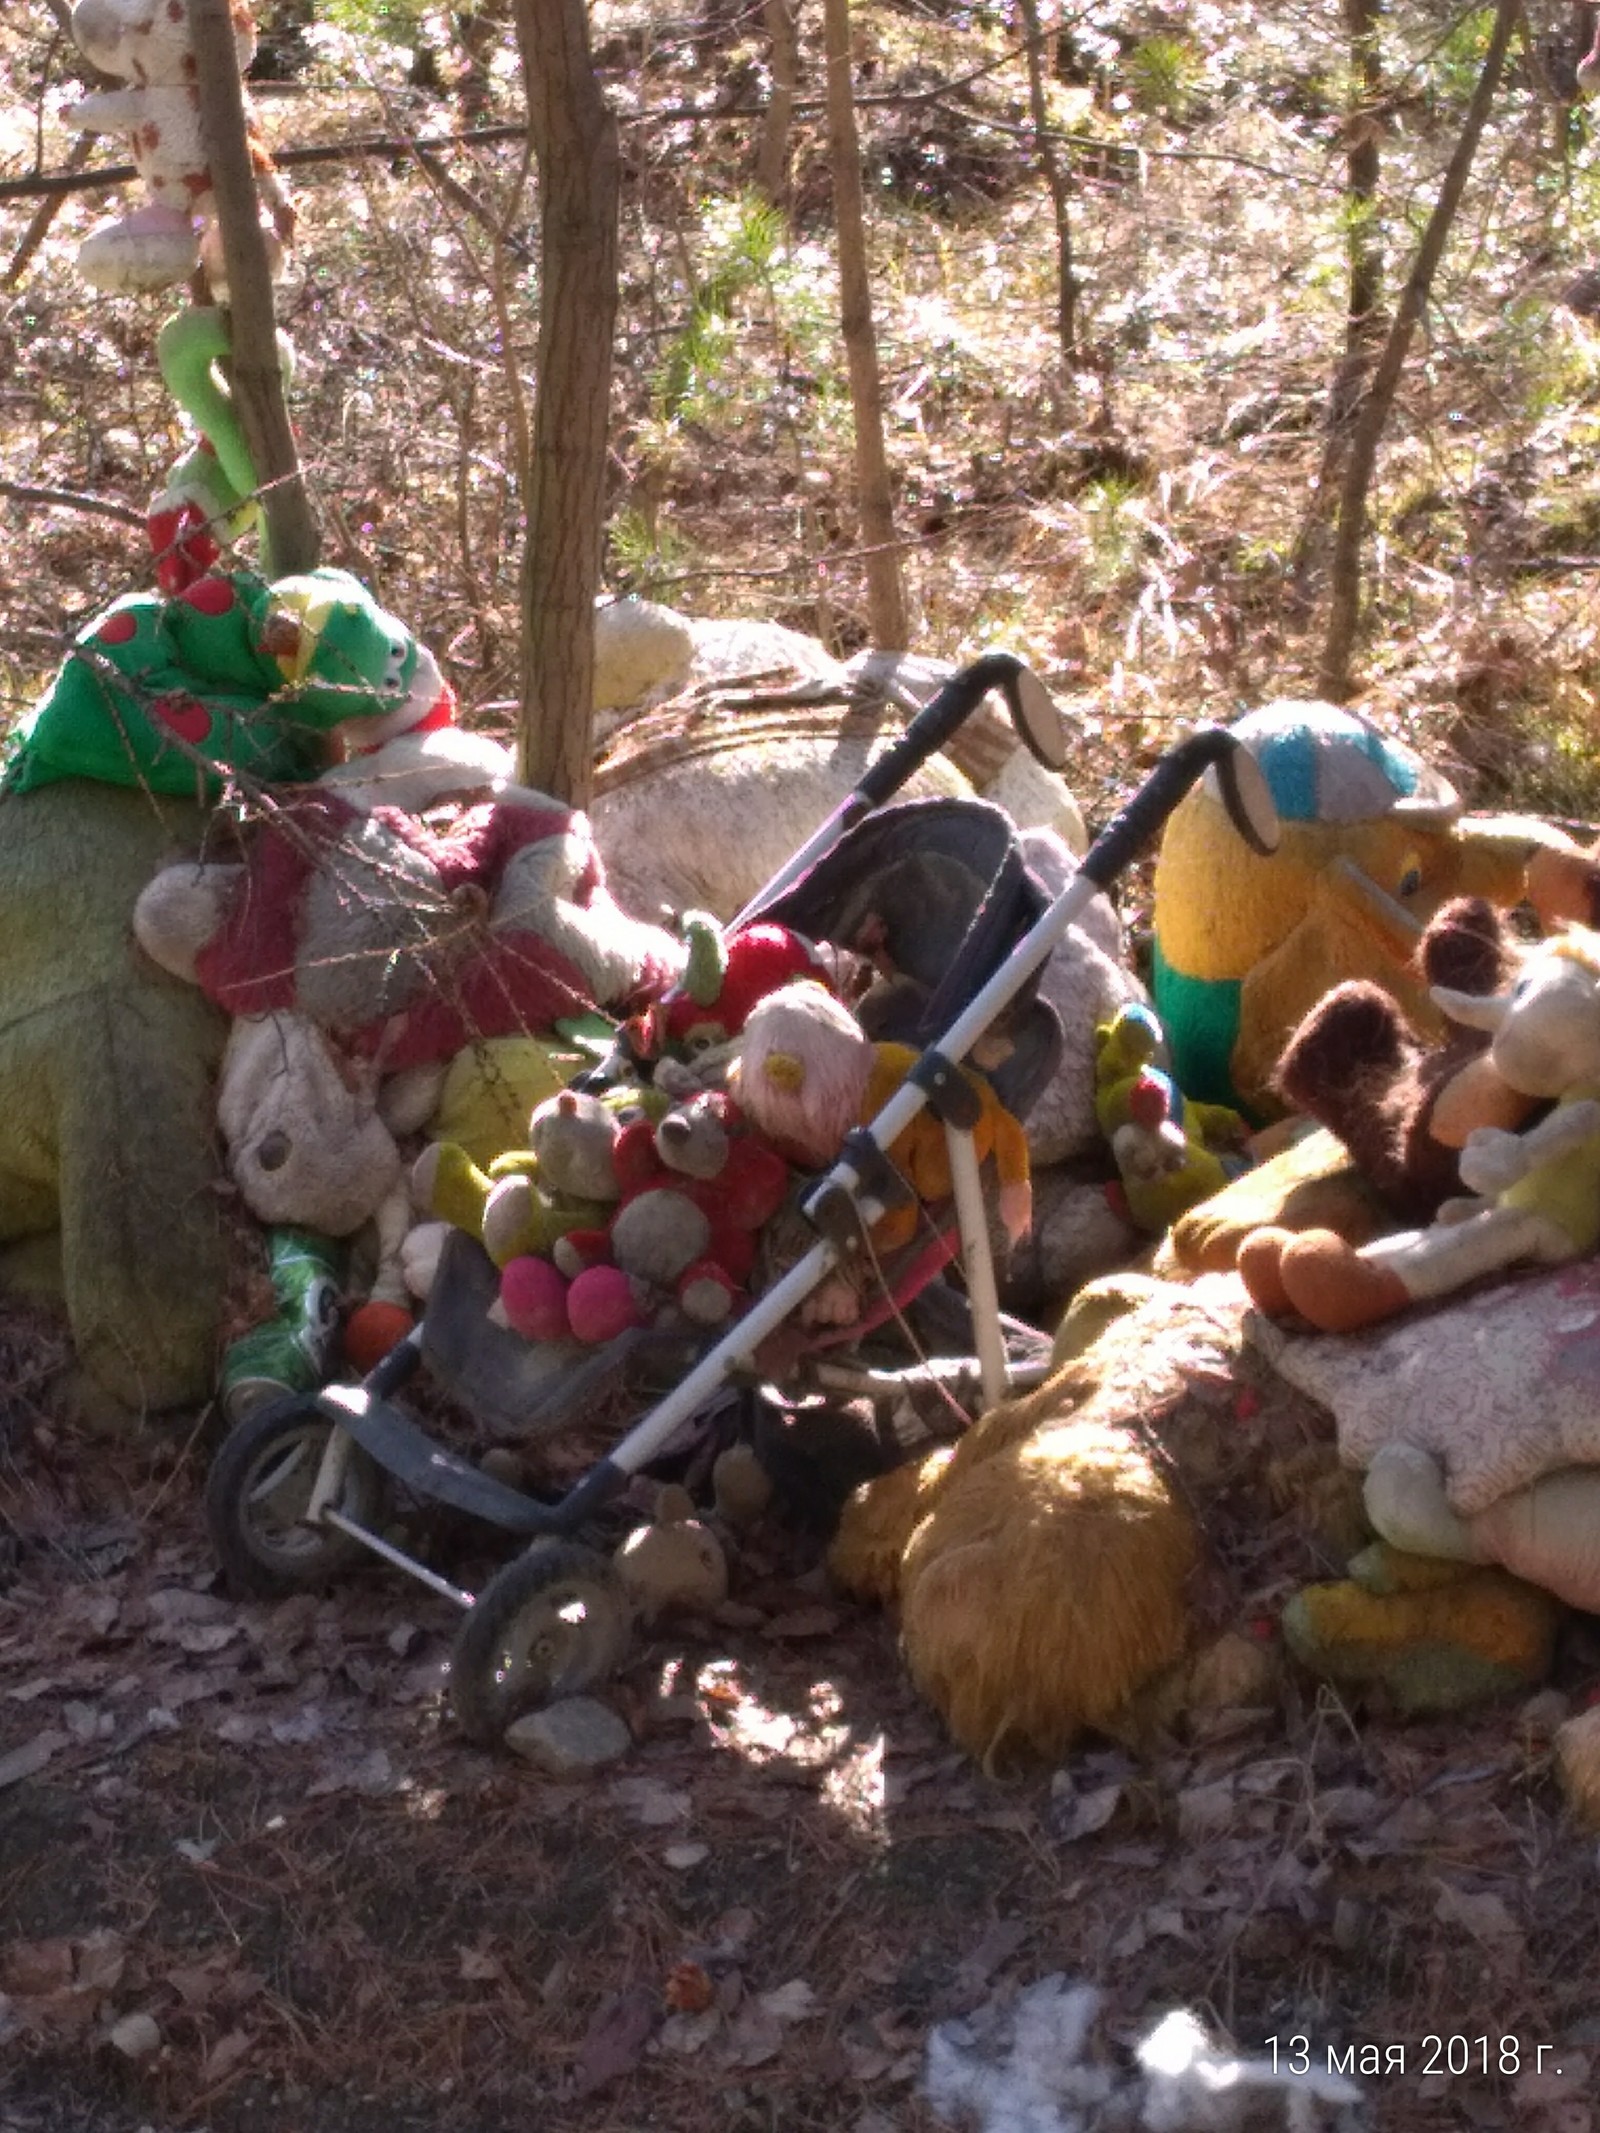 What for? - My, Forest, Oddities, Longpost, Soft toy, Toys, Kids toys, Dump, Fuck aesthetics